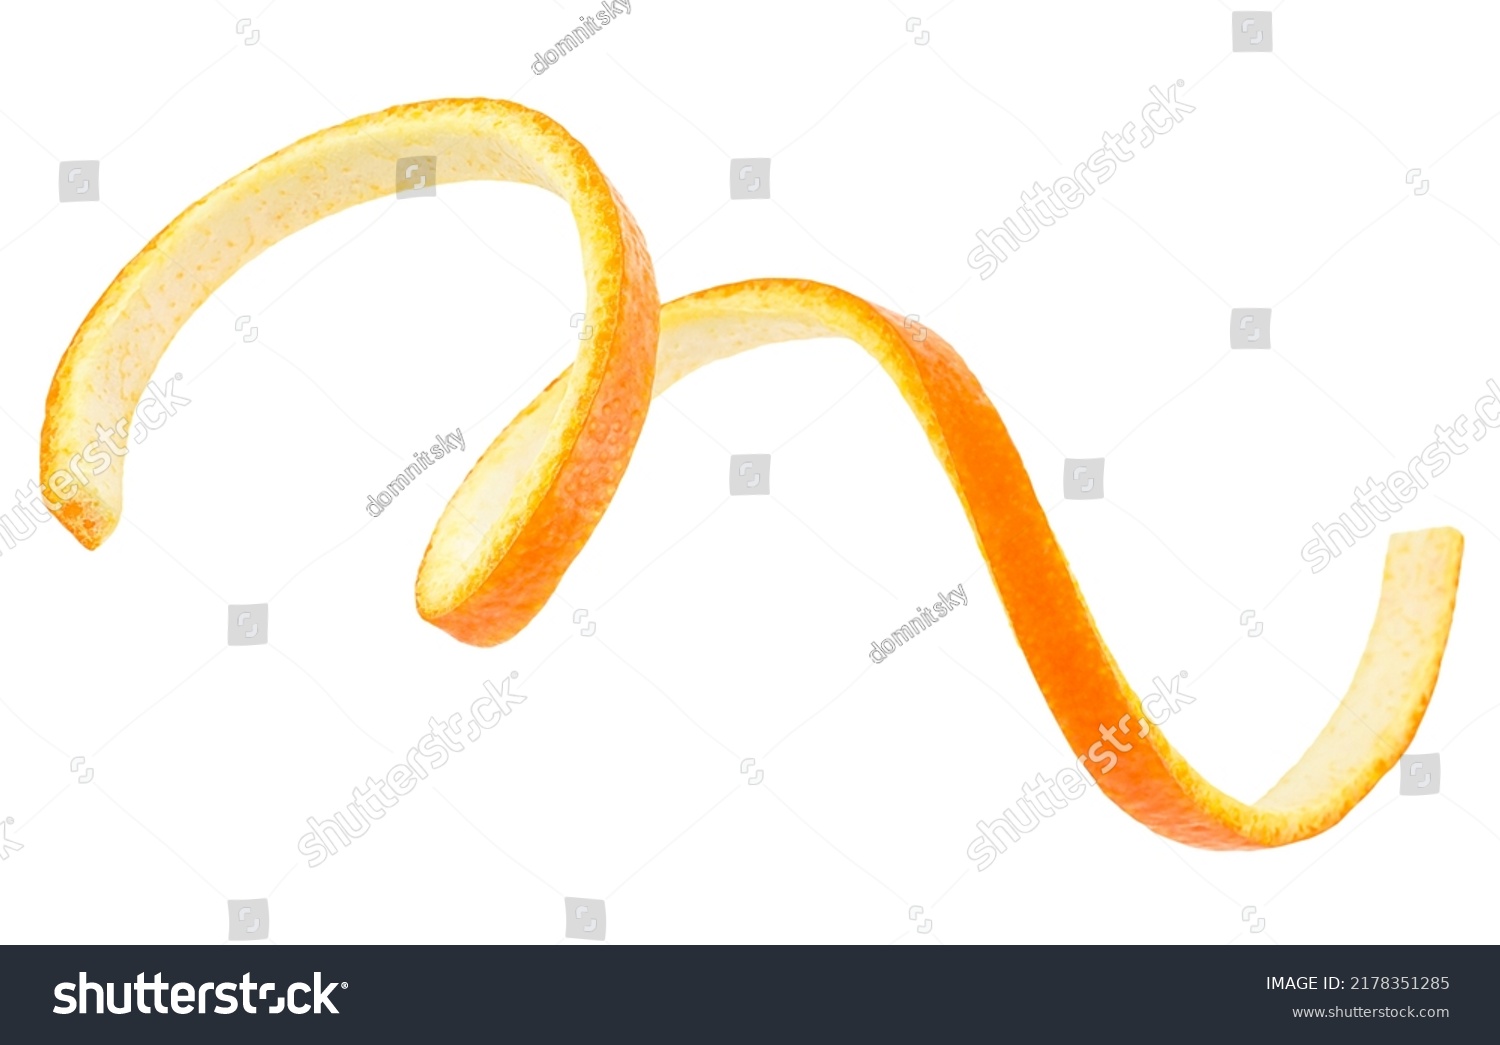 Spiral form of orange peel isolated on a white background, top view. #2178351285